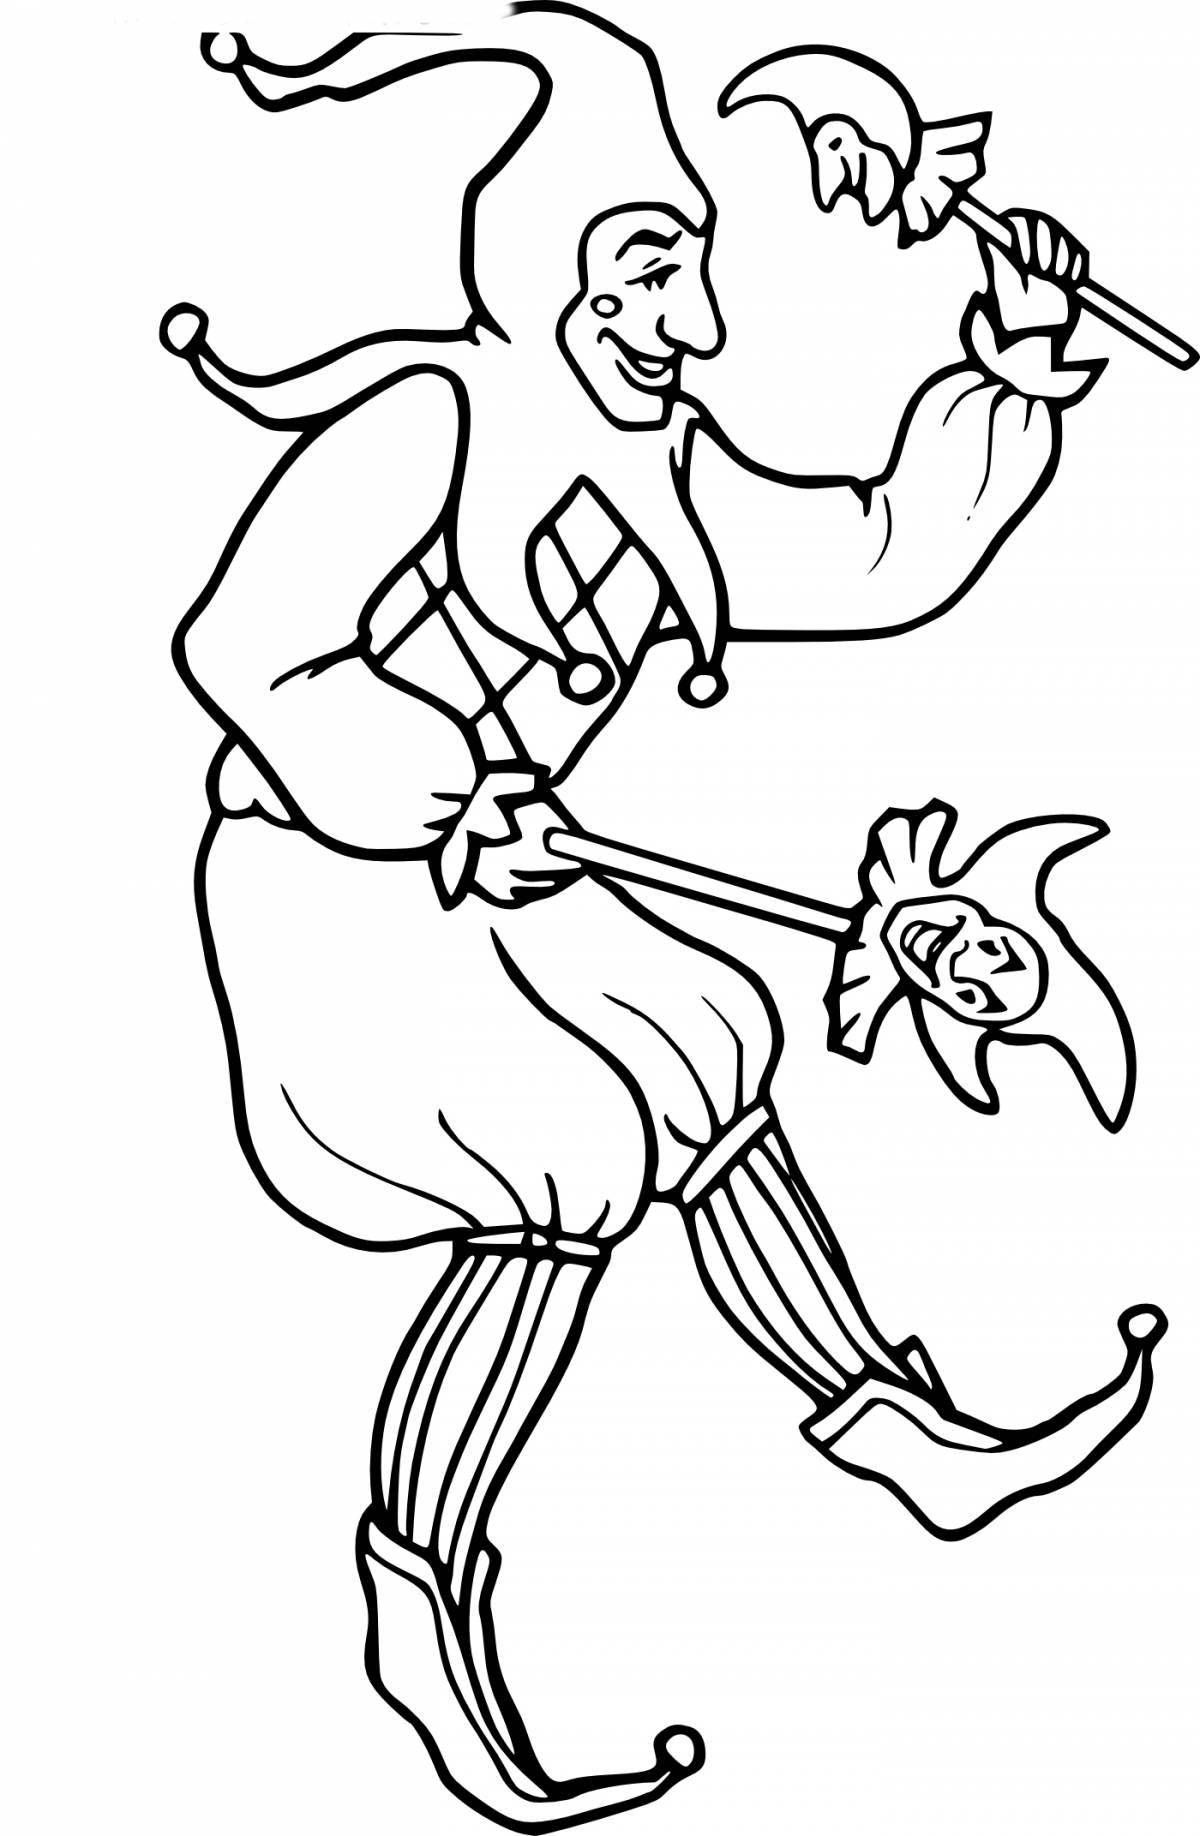 Jester's humorous coloring book